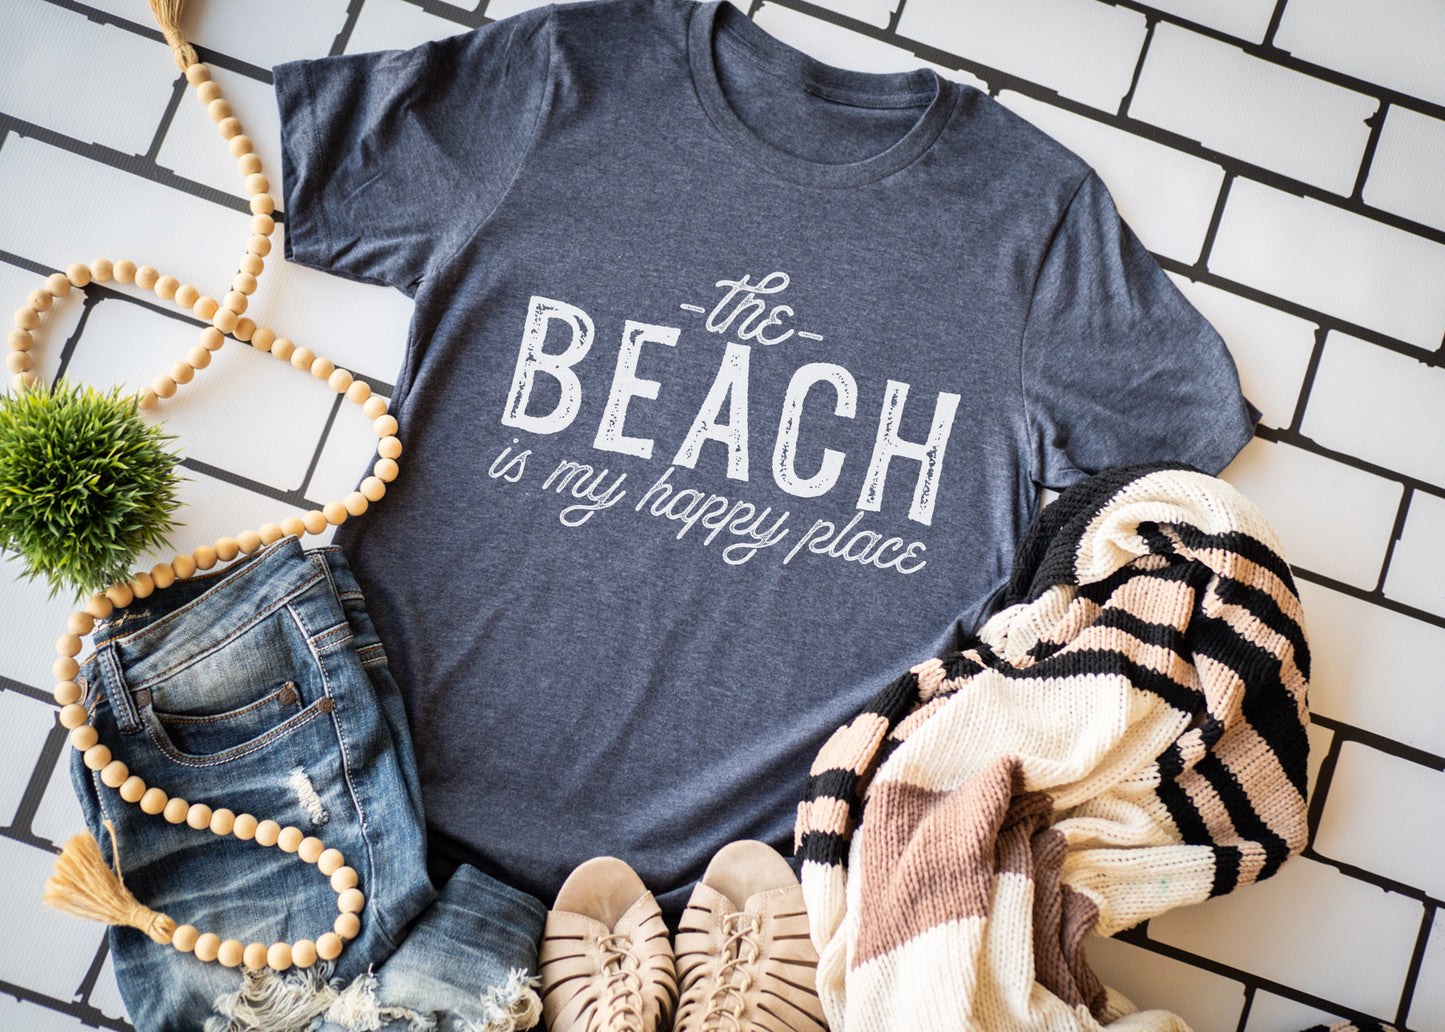 The Beach is My Happy Place Tee